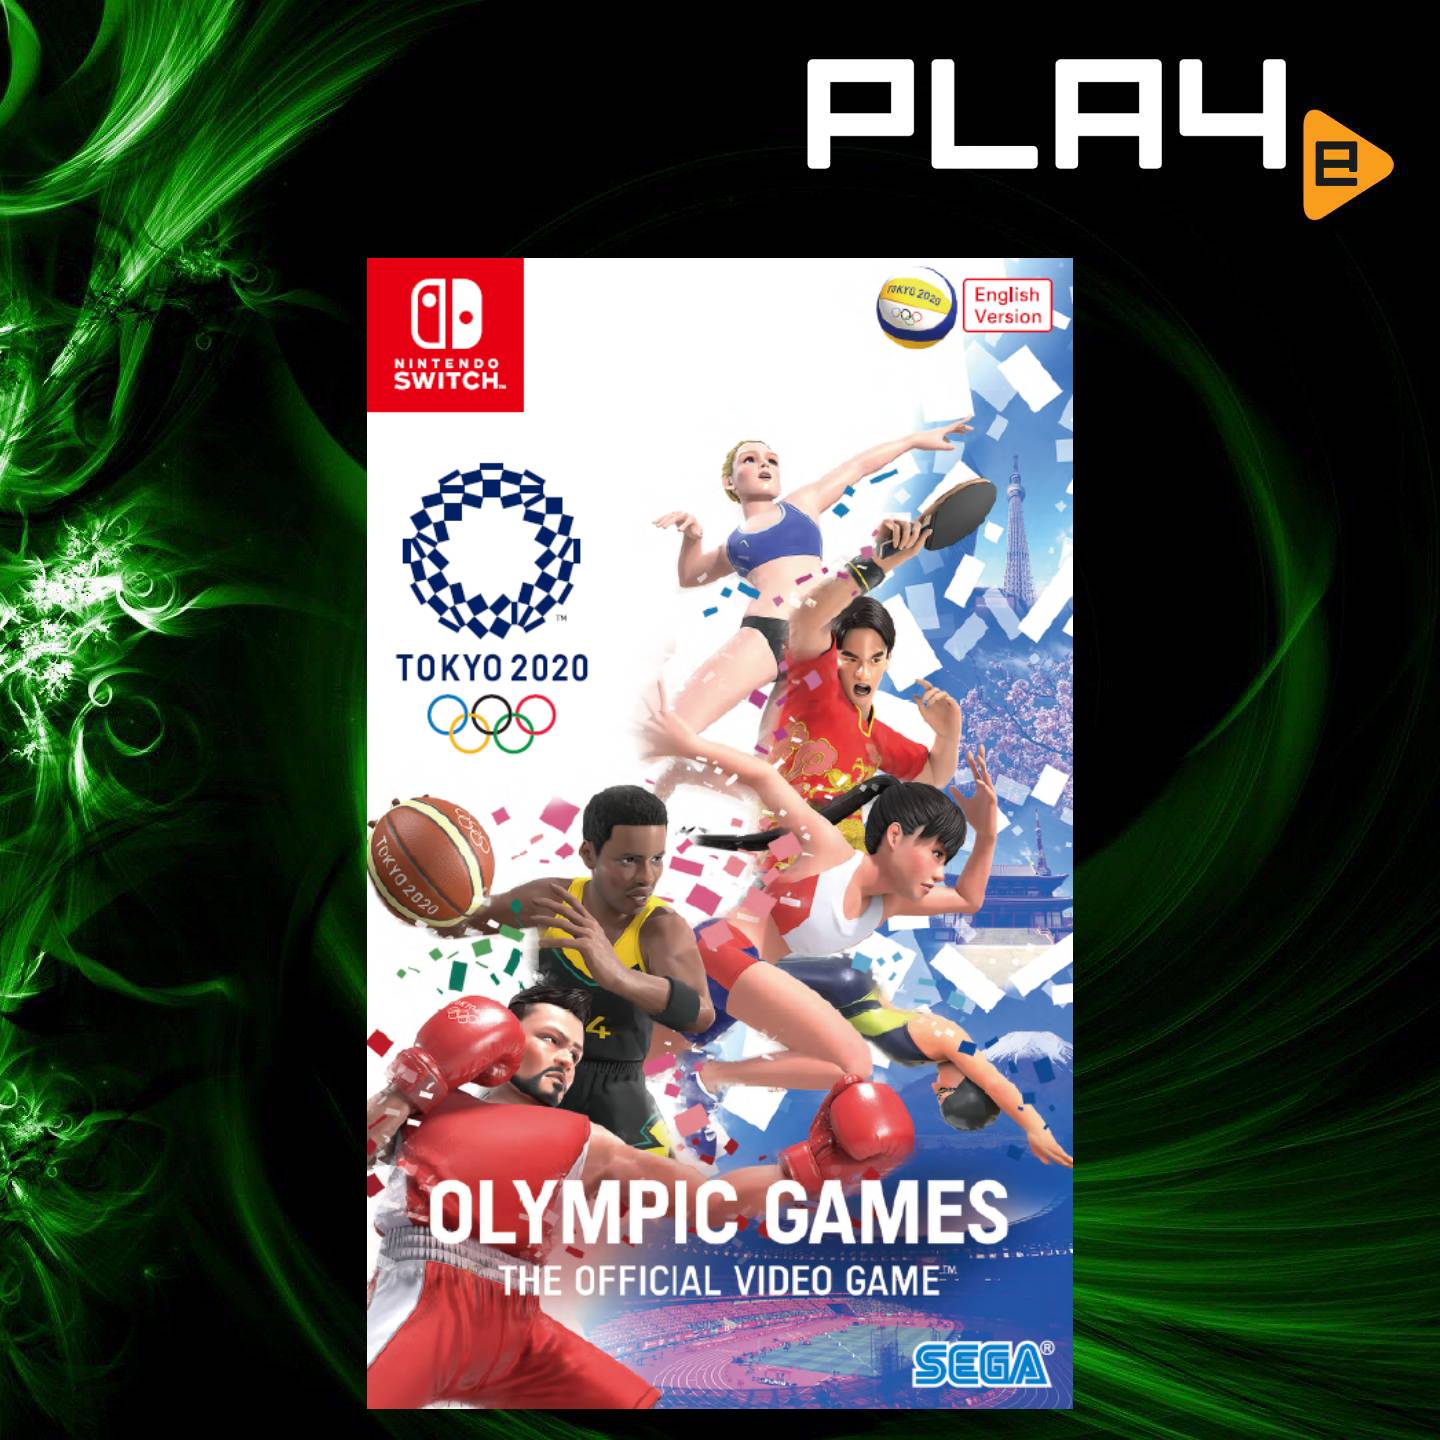 Nintendo Switch Olympic Games Tokyo 2020 The Official Video Game PLAYe